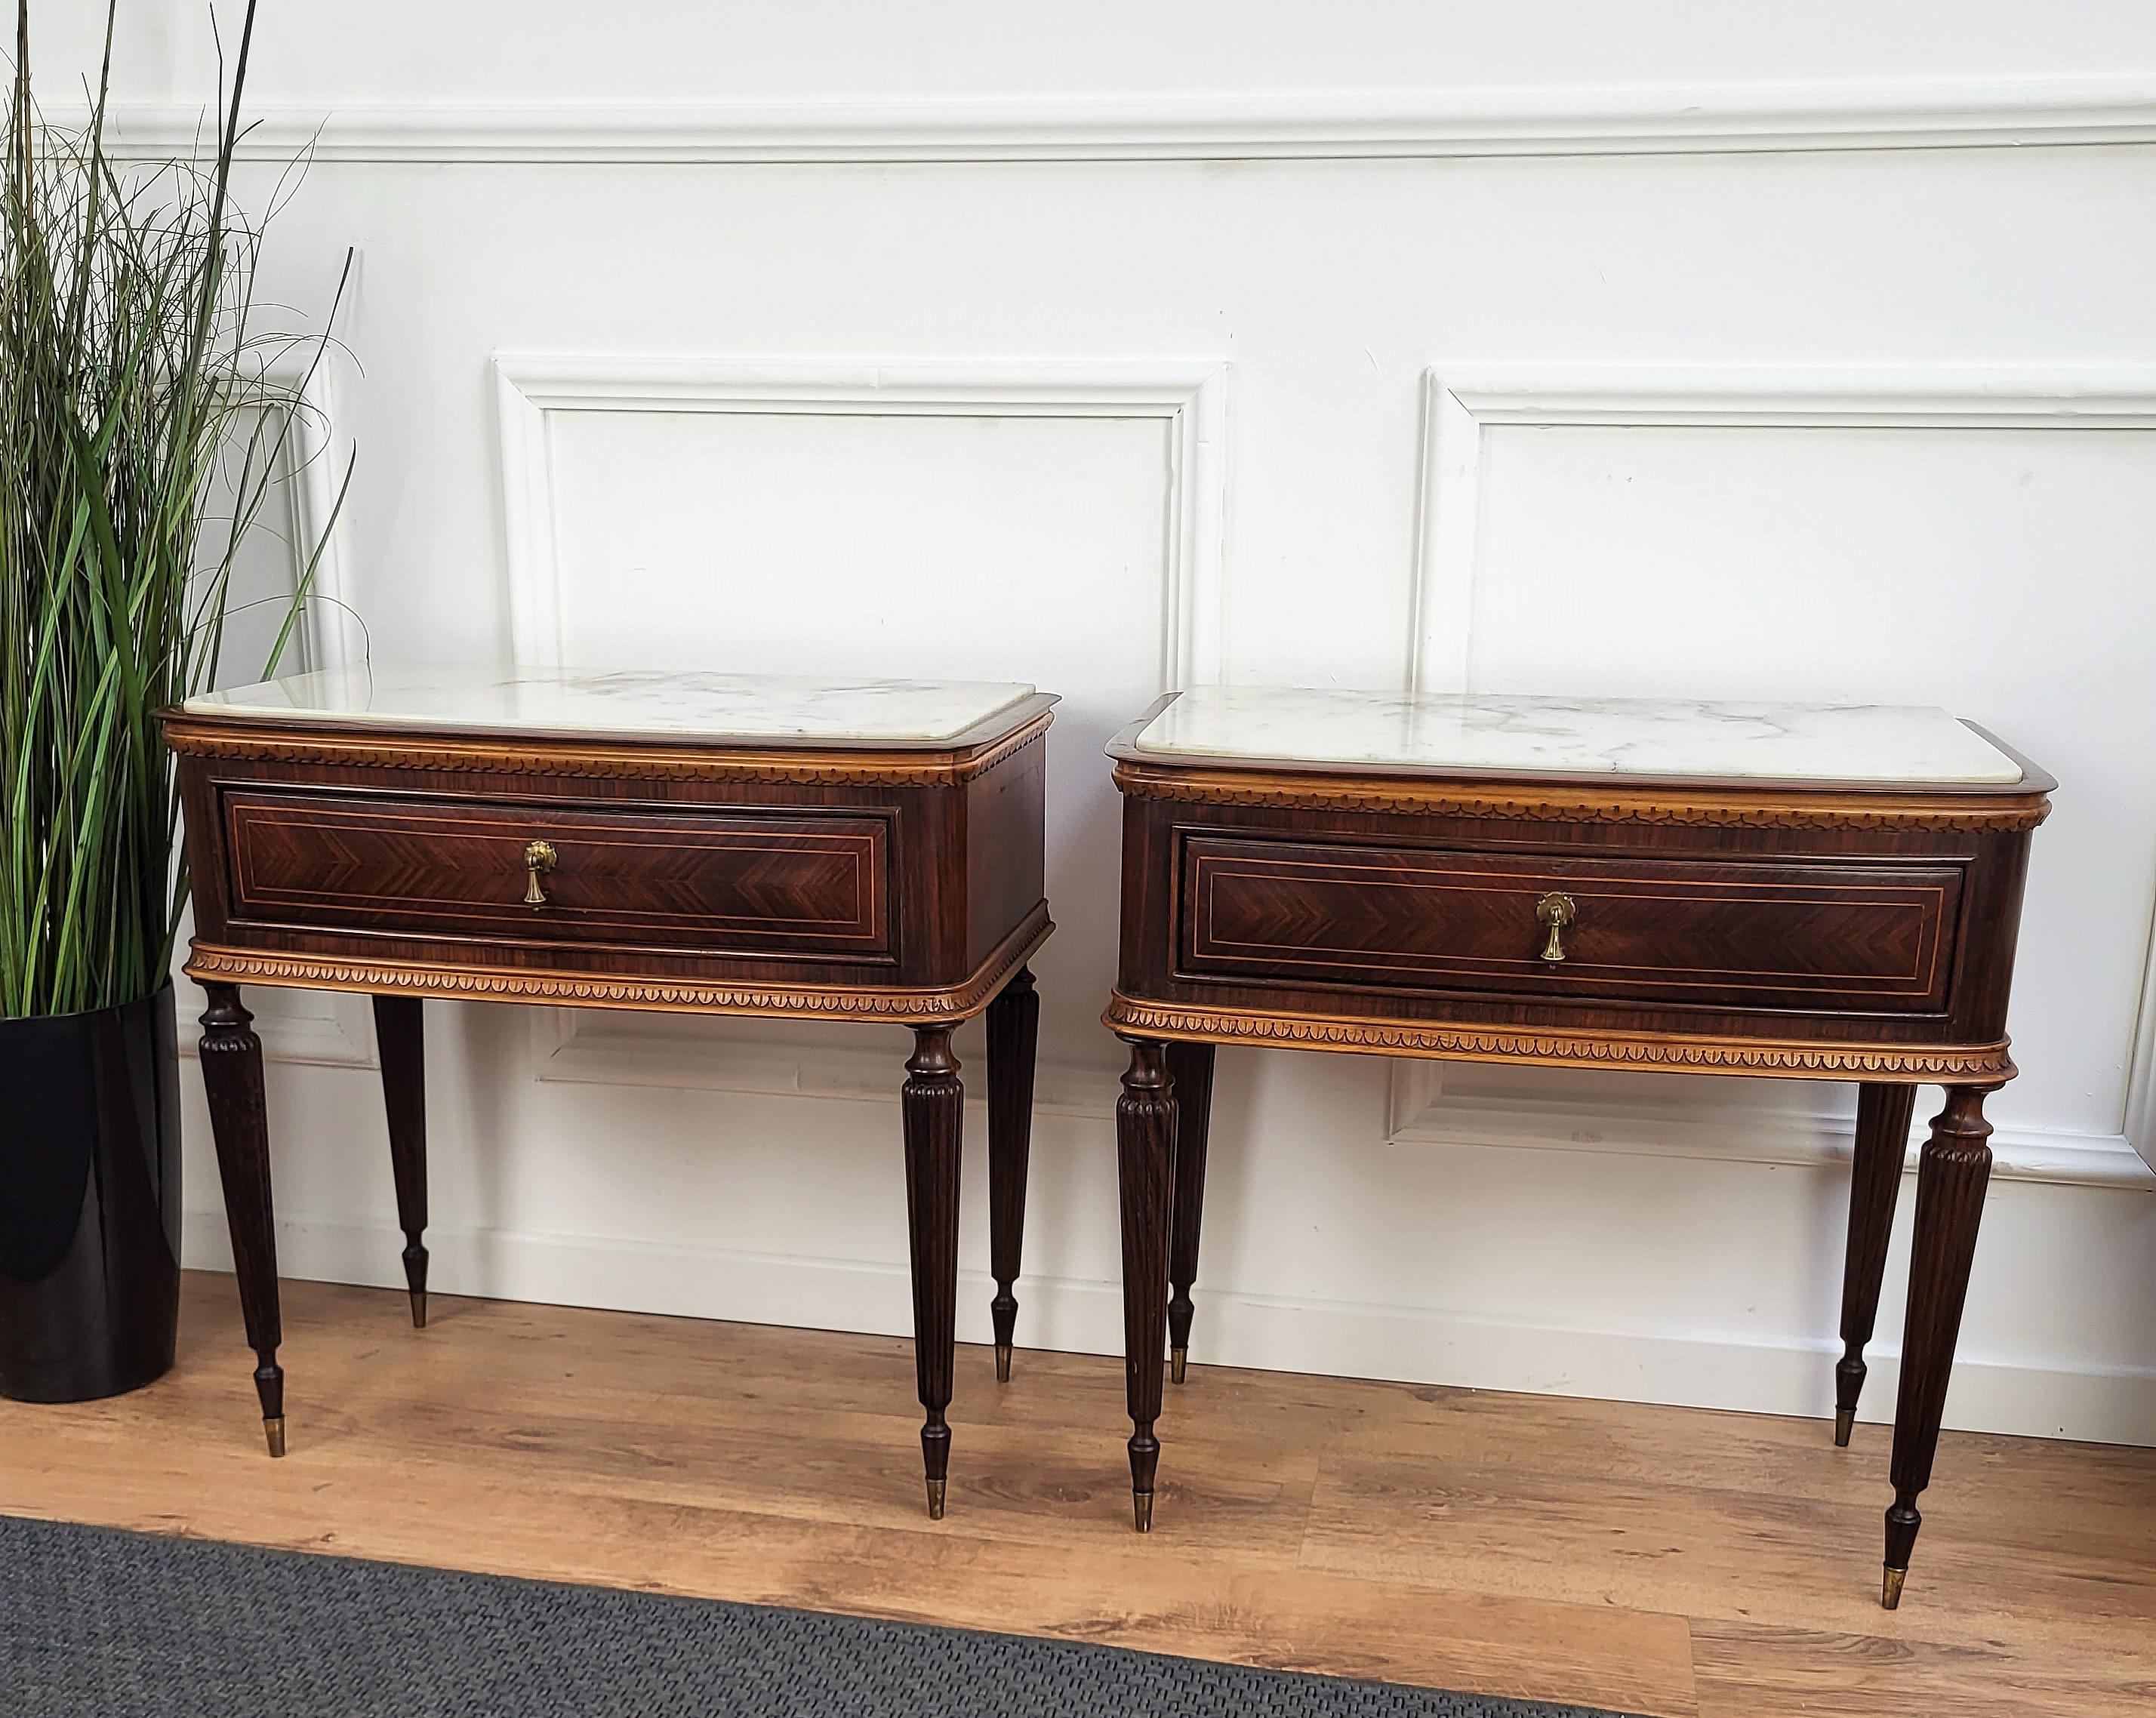 Very elegant and refined Italian 1950s neoclassical pair of night stands bed side tables with greatly carved detailed and decorated wooden structure, wood veneer decorated front drawer and white carrara marble top with brass details and fluted